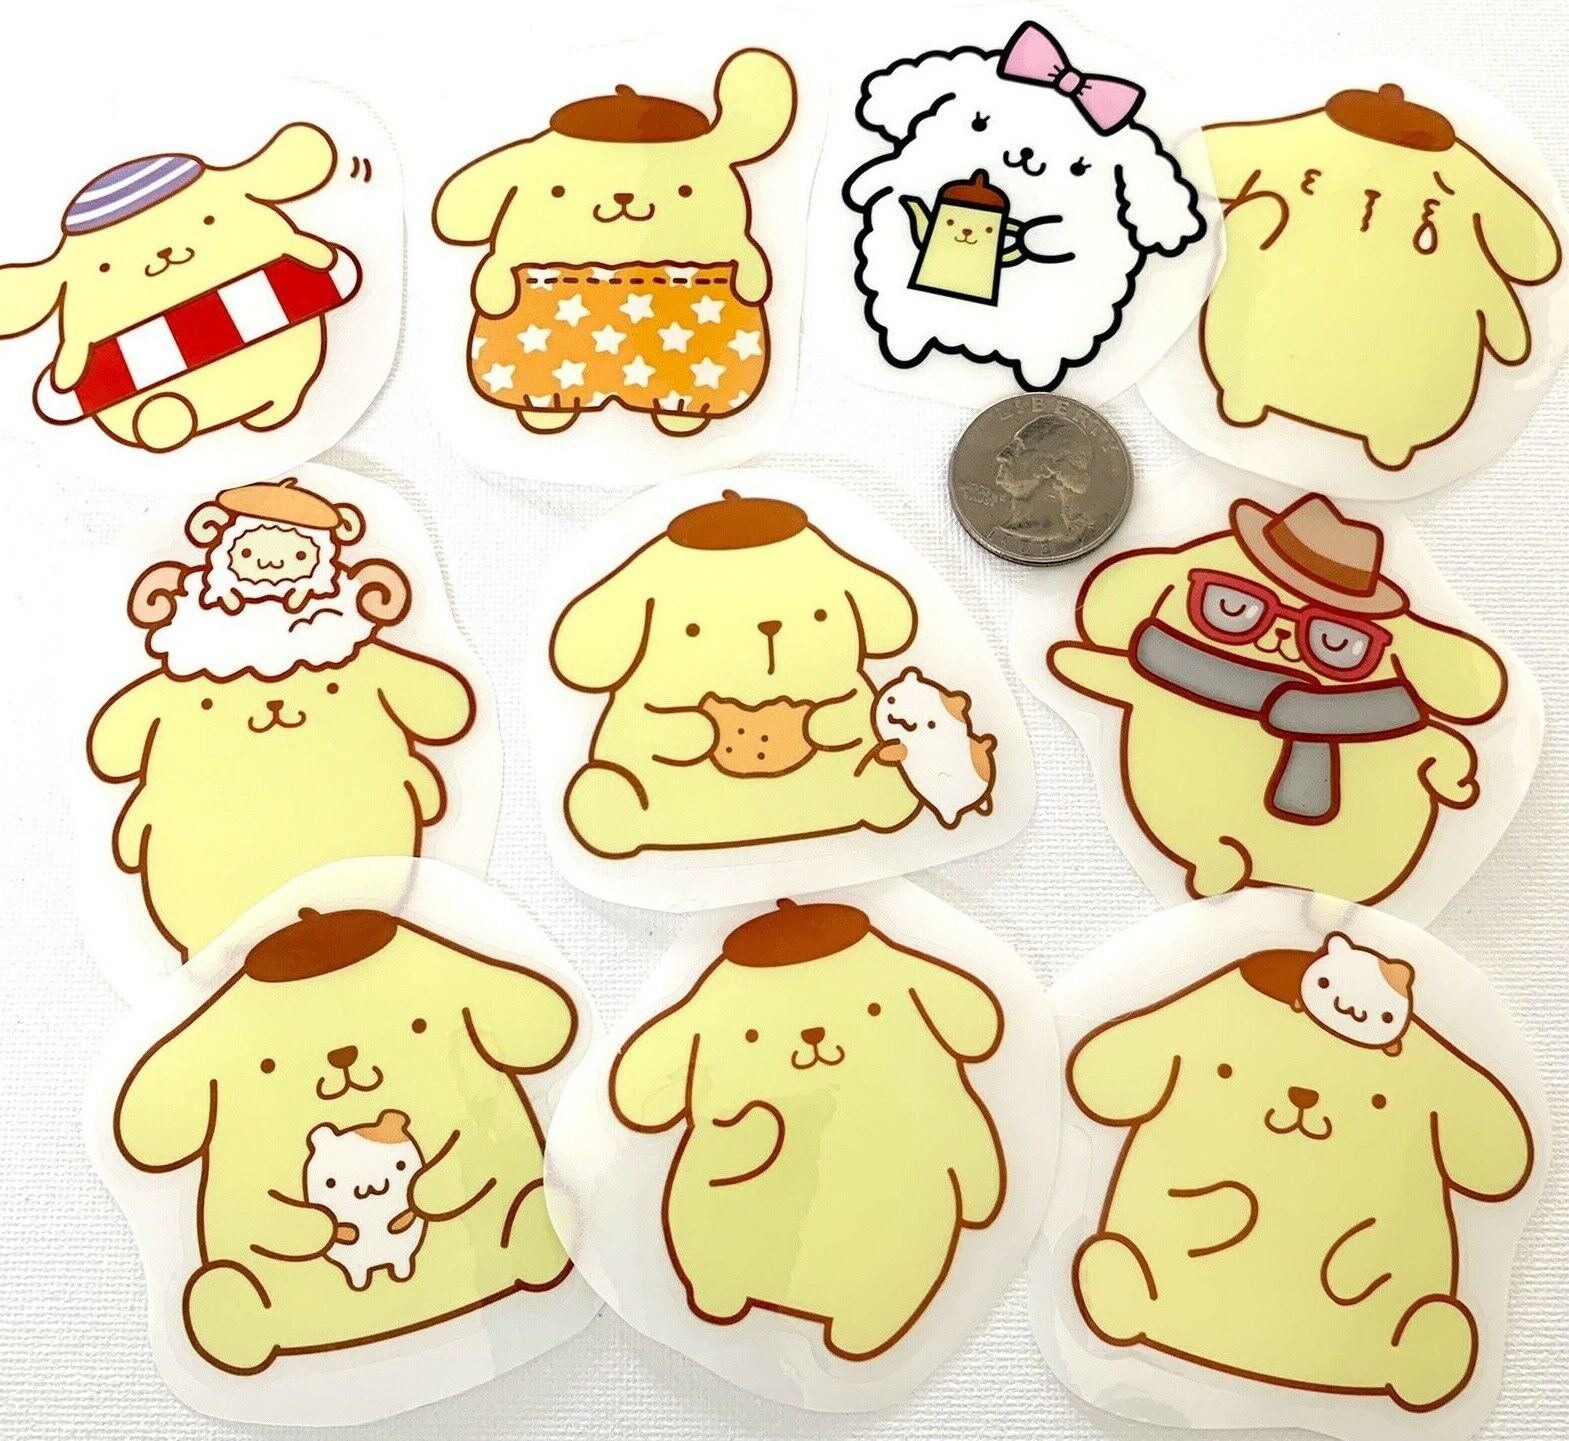 POMPOMPURIN Stickers Waterproof Large Kawaii Sanrio for Laptop Cell Phone 10 PCS